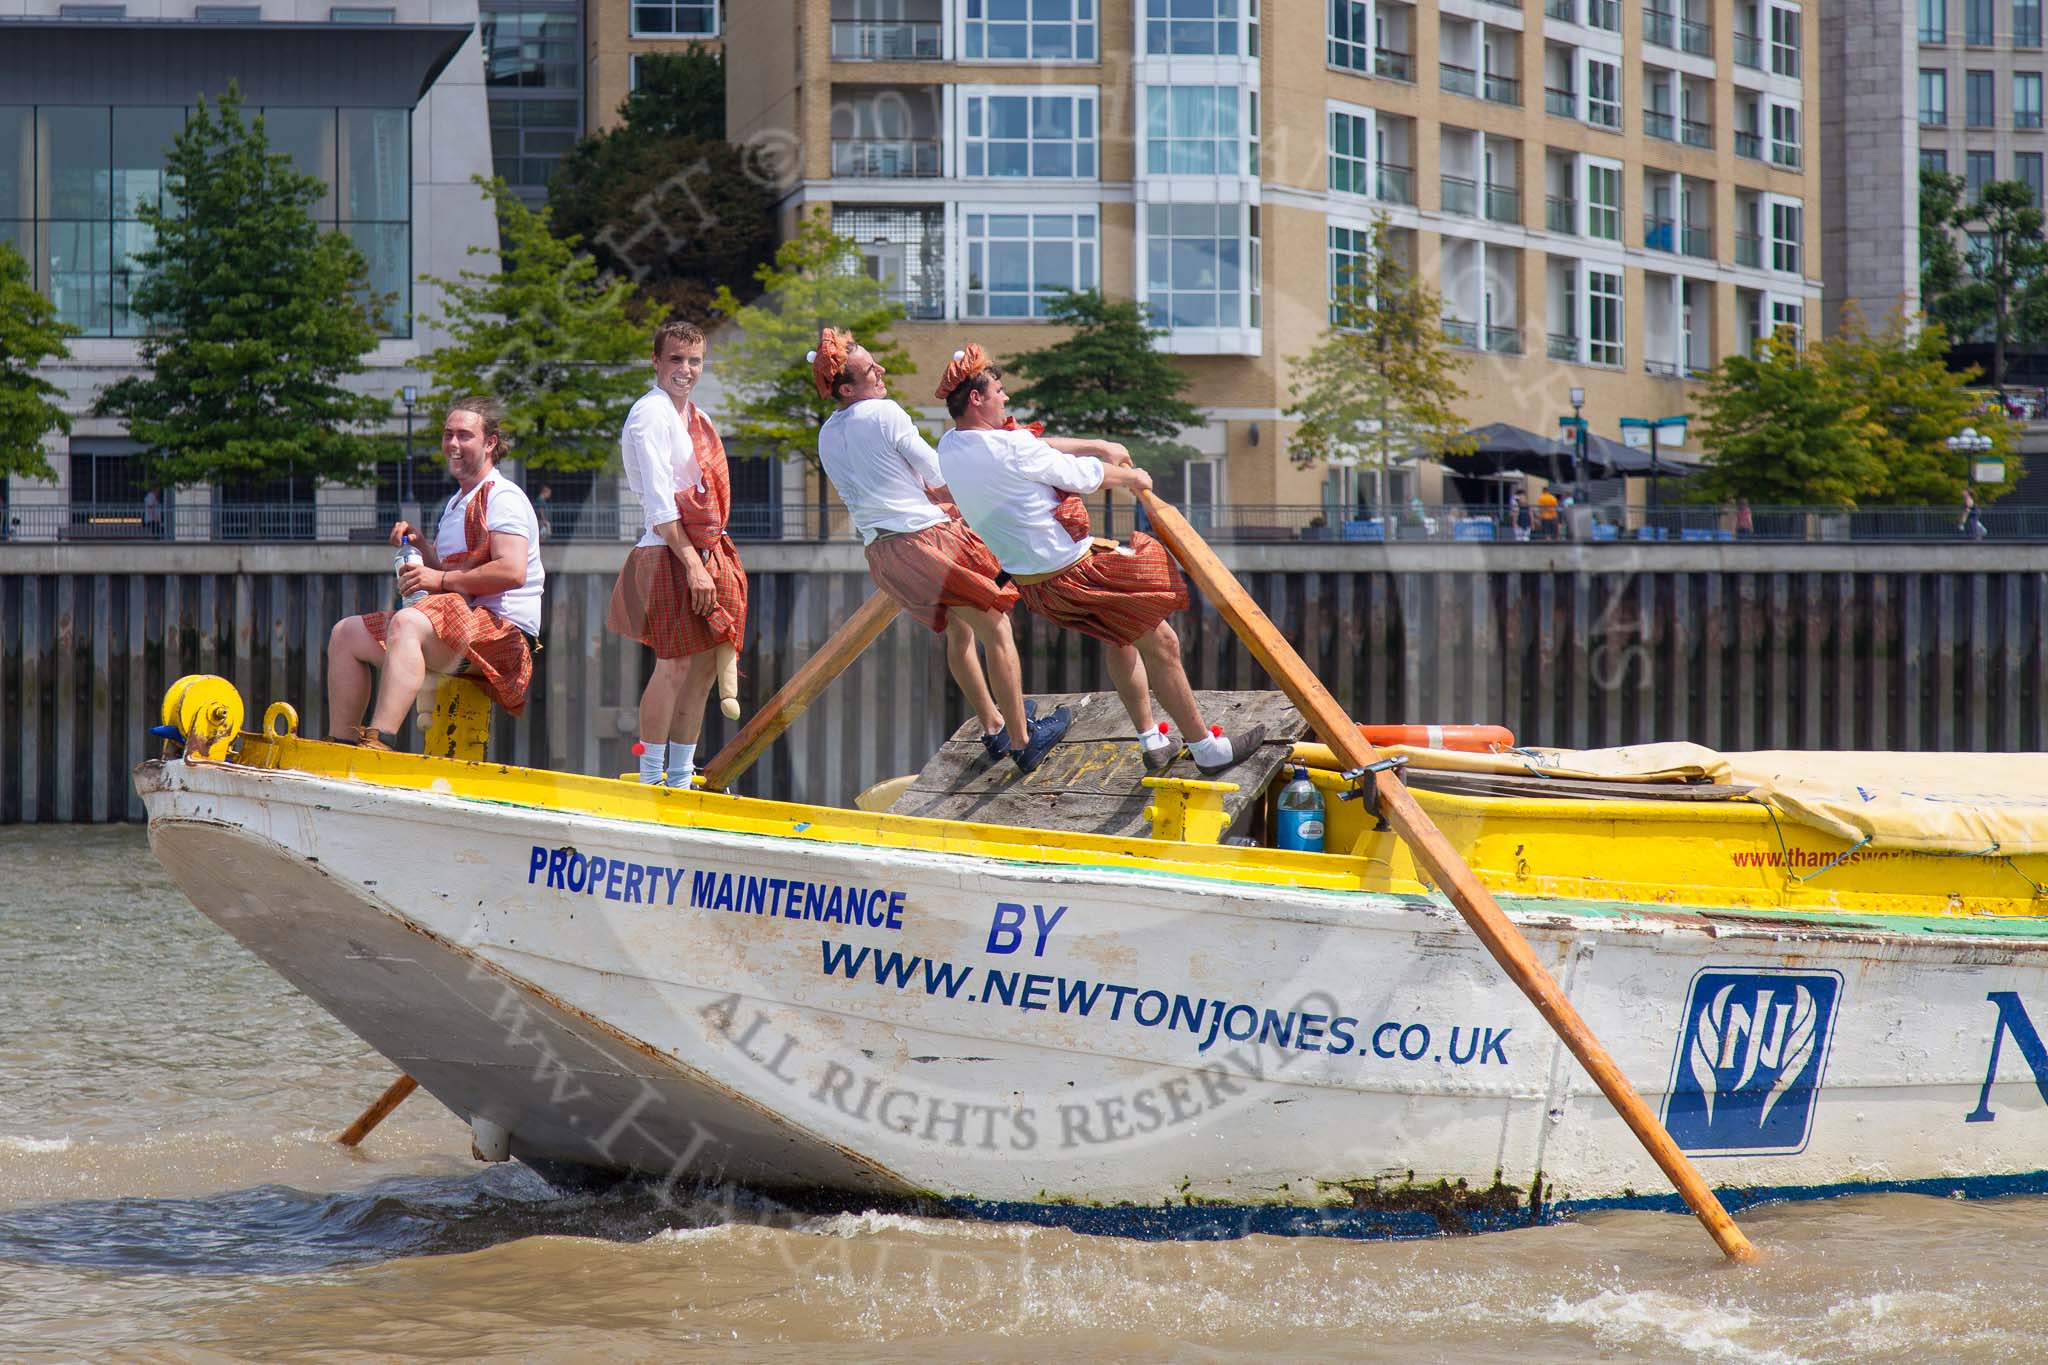 TOW River Thames Barge Driving Race 2013: Rowers in skirts on board of barge "Hoppy", by GPS Fabrication..
River Thames between Greenwich and Westminster,
London,

United Kingdom,
on 13 July 2013 at 13:15, image #301